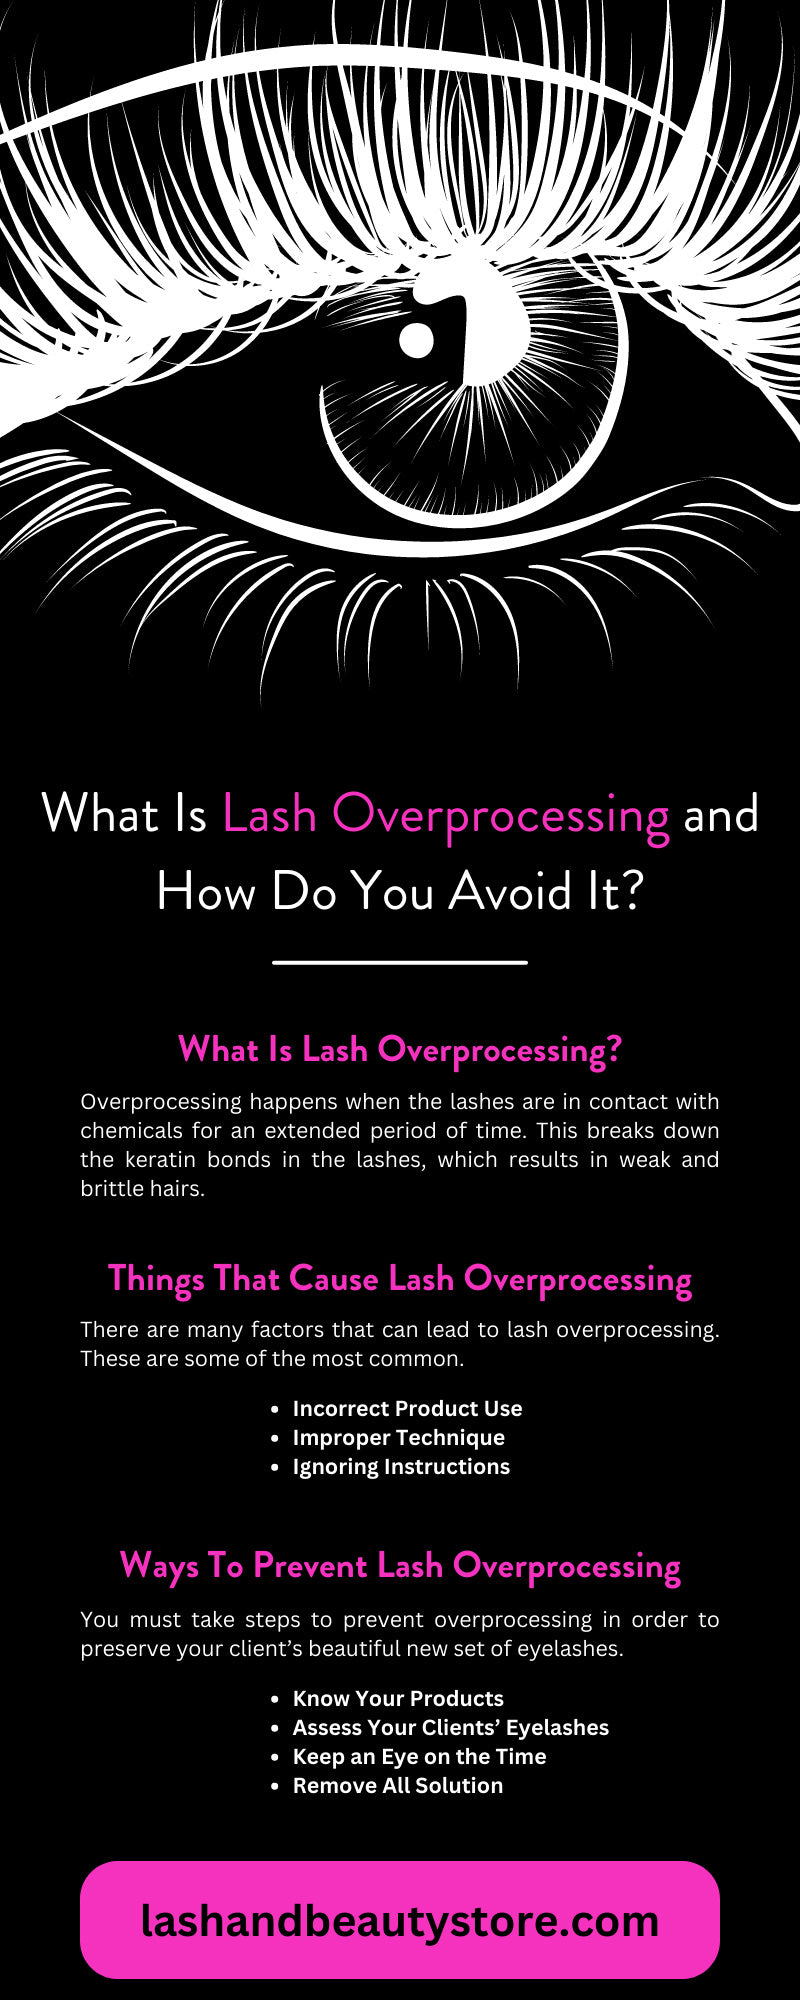 What Is Lash Overprocessing and How Do You Avoid It?